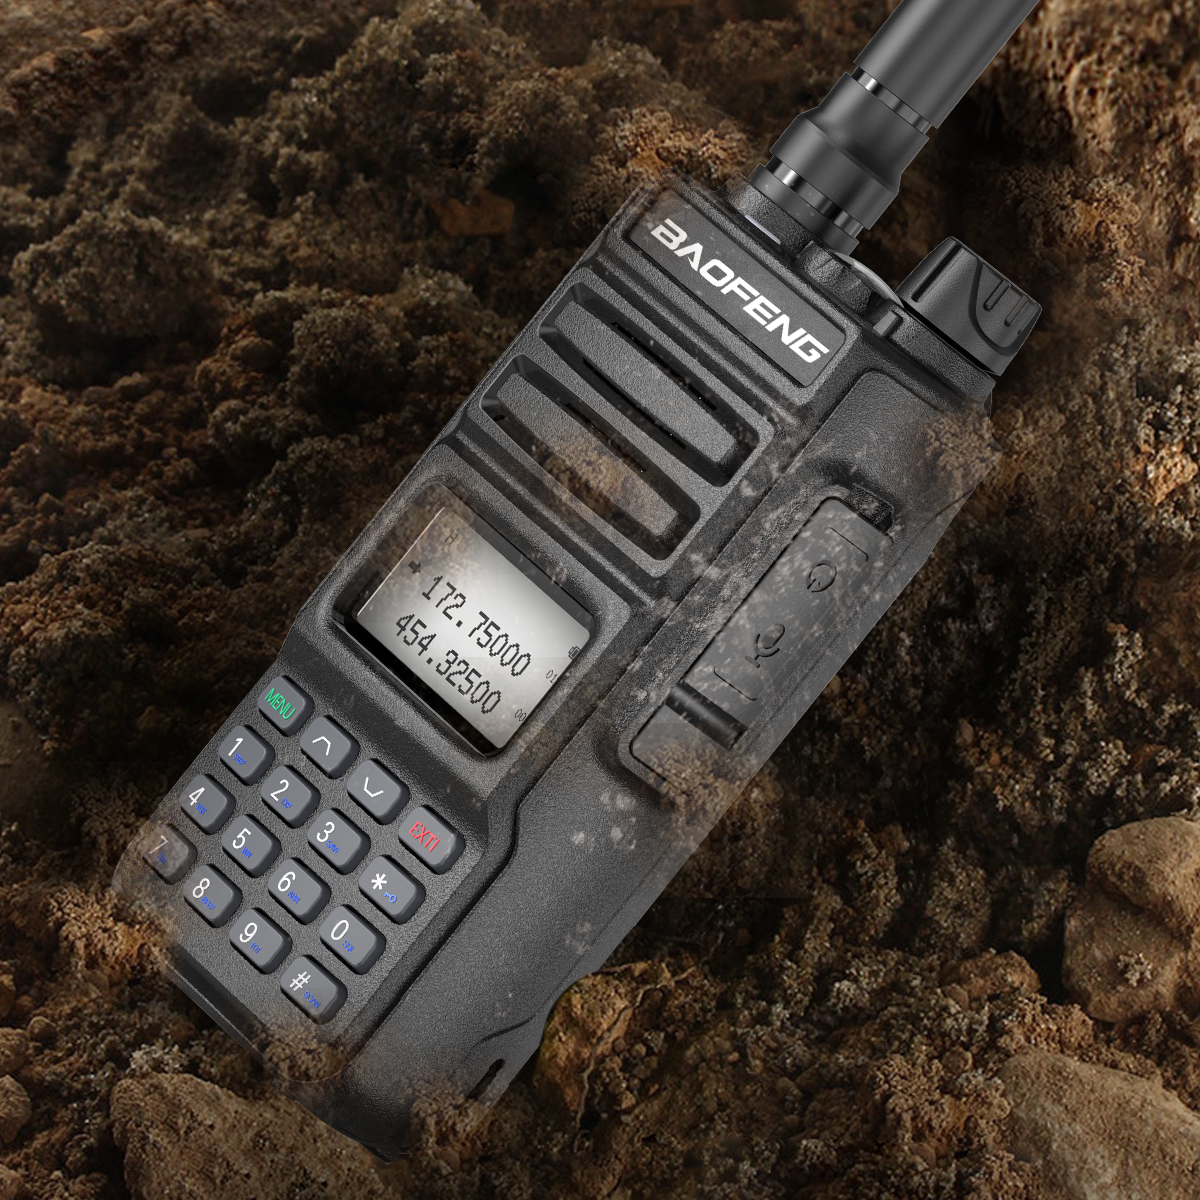 Find 2022 Baofeng UV-15R Walkie Talkie 10W High Power 999 Channels Dual Band UHF VHF Radios Transmitter USB Charger Two Way Radio for Sale on Gipsybee.com with cryptocurrencies